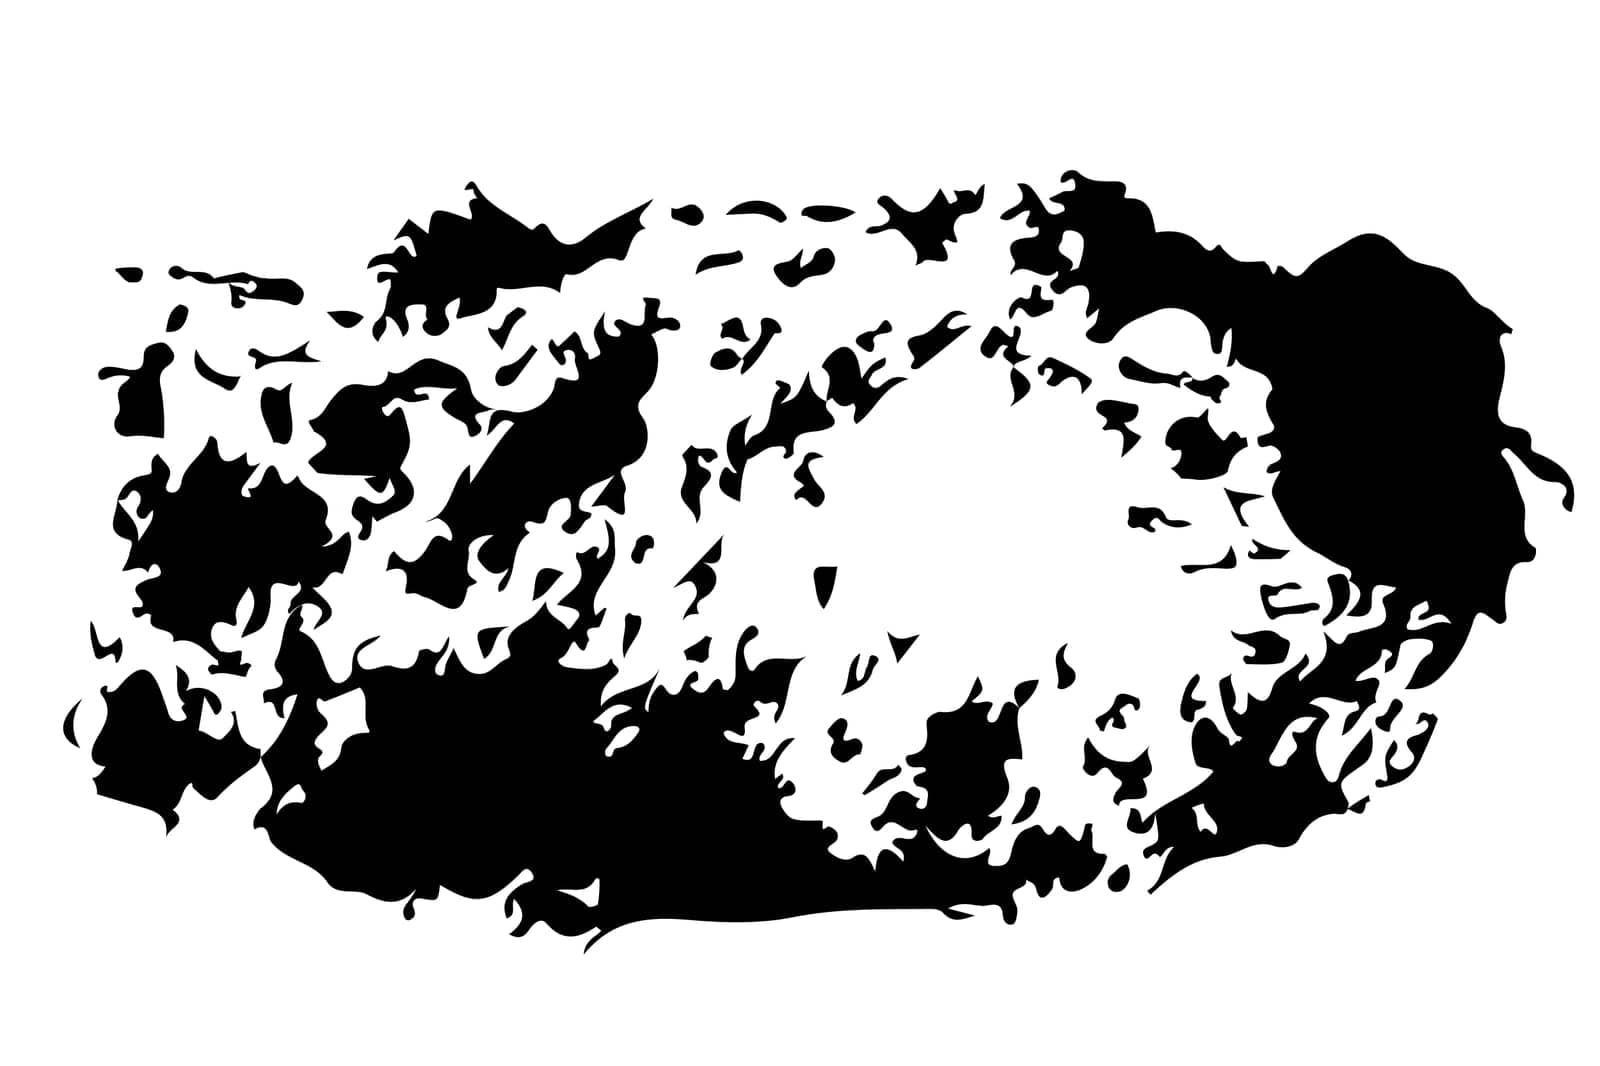 Ink splat overlaid by dots in black and white. Vector illustration